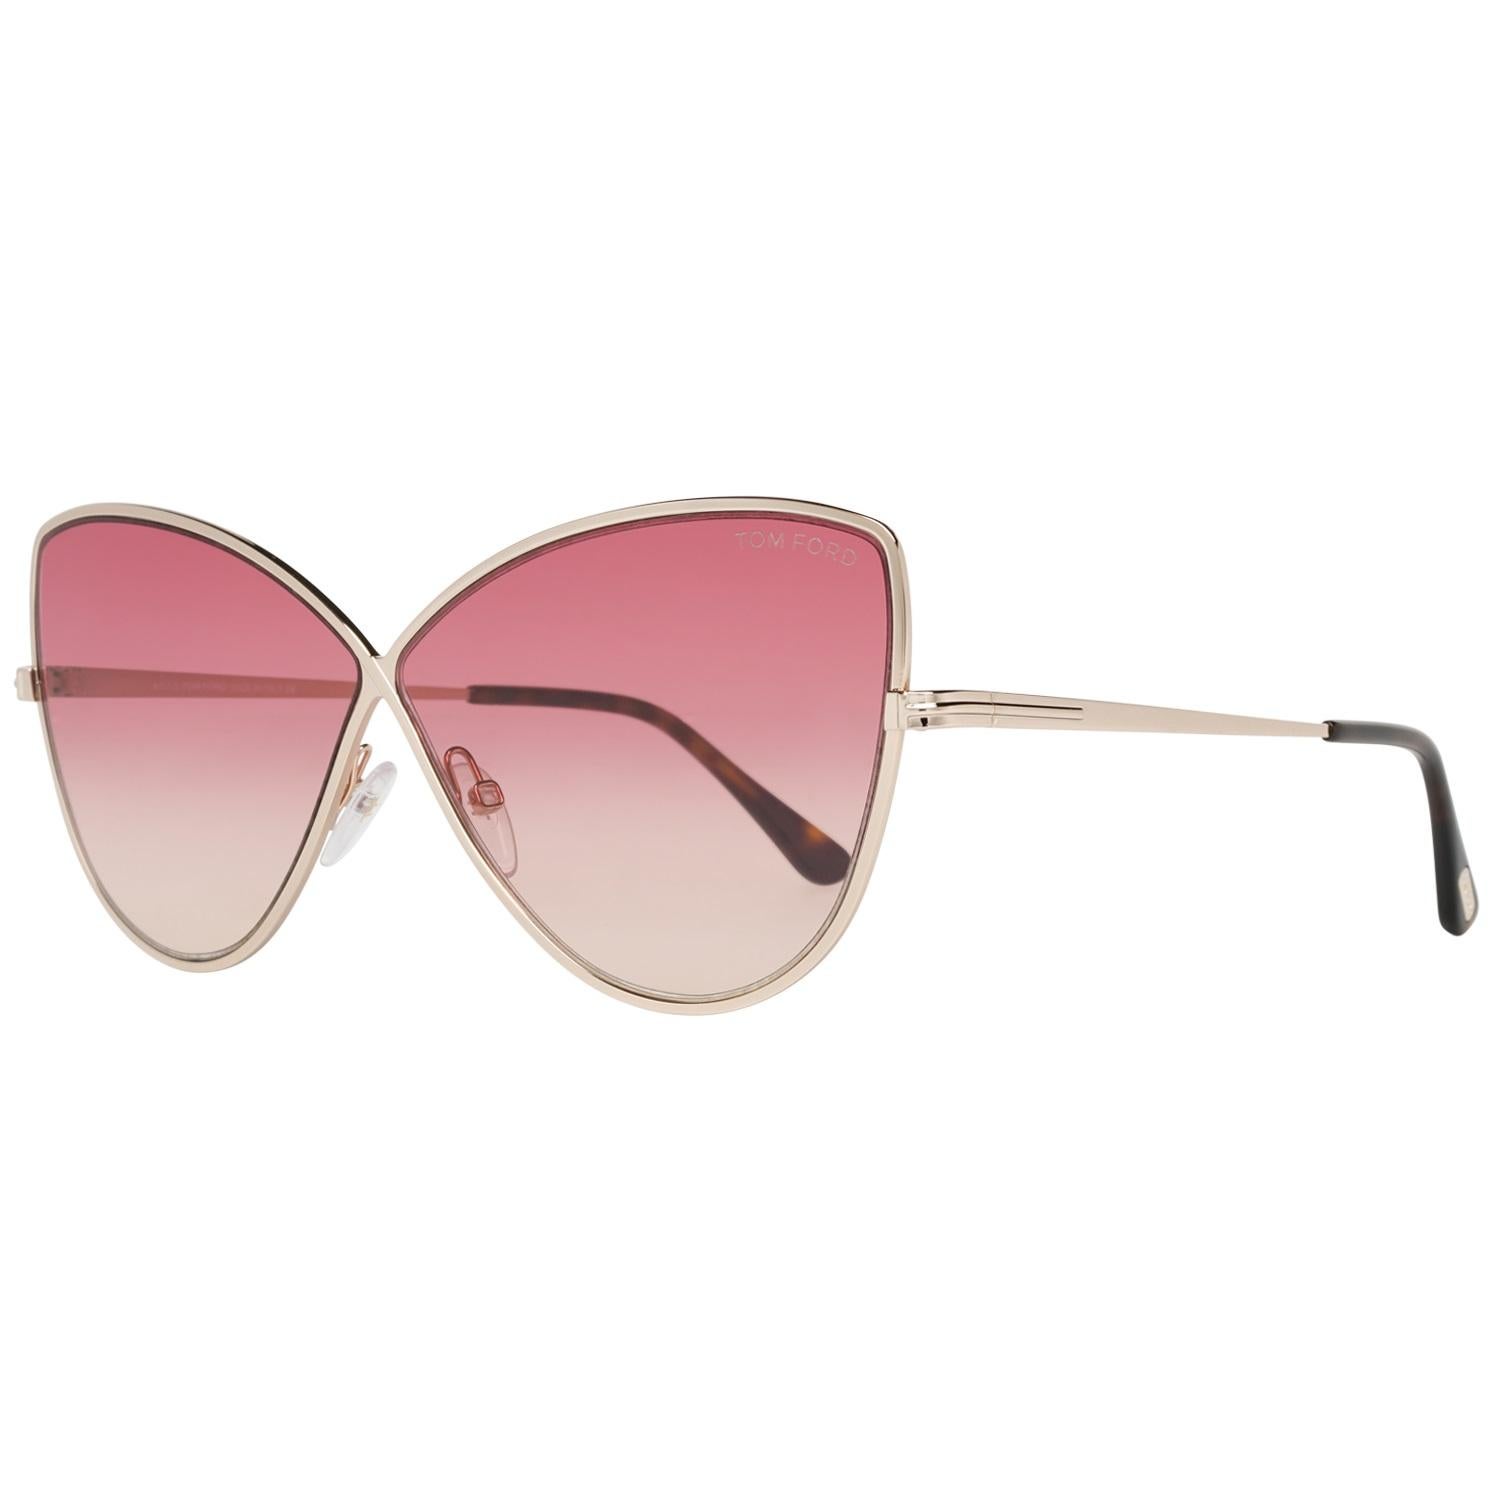 Details

MATERIAL: Metal

COLOR: Gold

MODEL: FT0569 6528T

GENDER: Women

COUNTRY OF MANUFACTURE: Italy

TYPE: Sunglasses

ORIGINAL CASE?: Yes

STYLE: Butterfly

OCCASION: Casual

FEATURES: Lightweight

LENS COLOR: Red

LENS TECHNOLOGY: